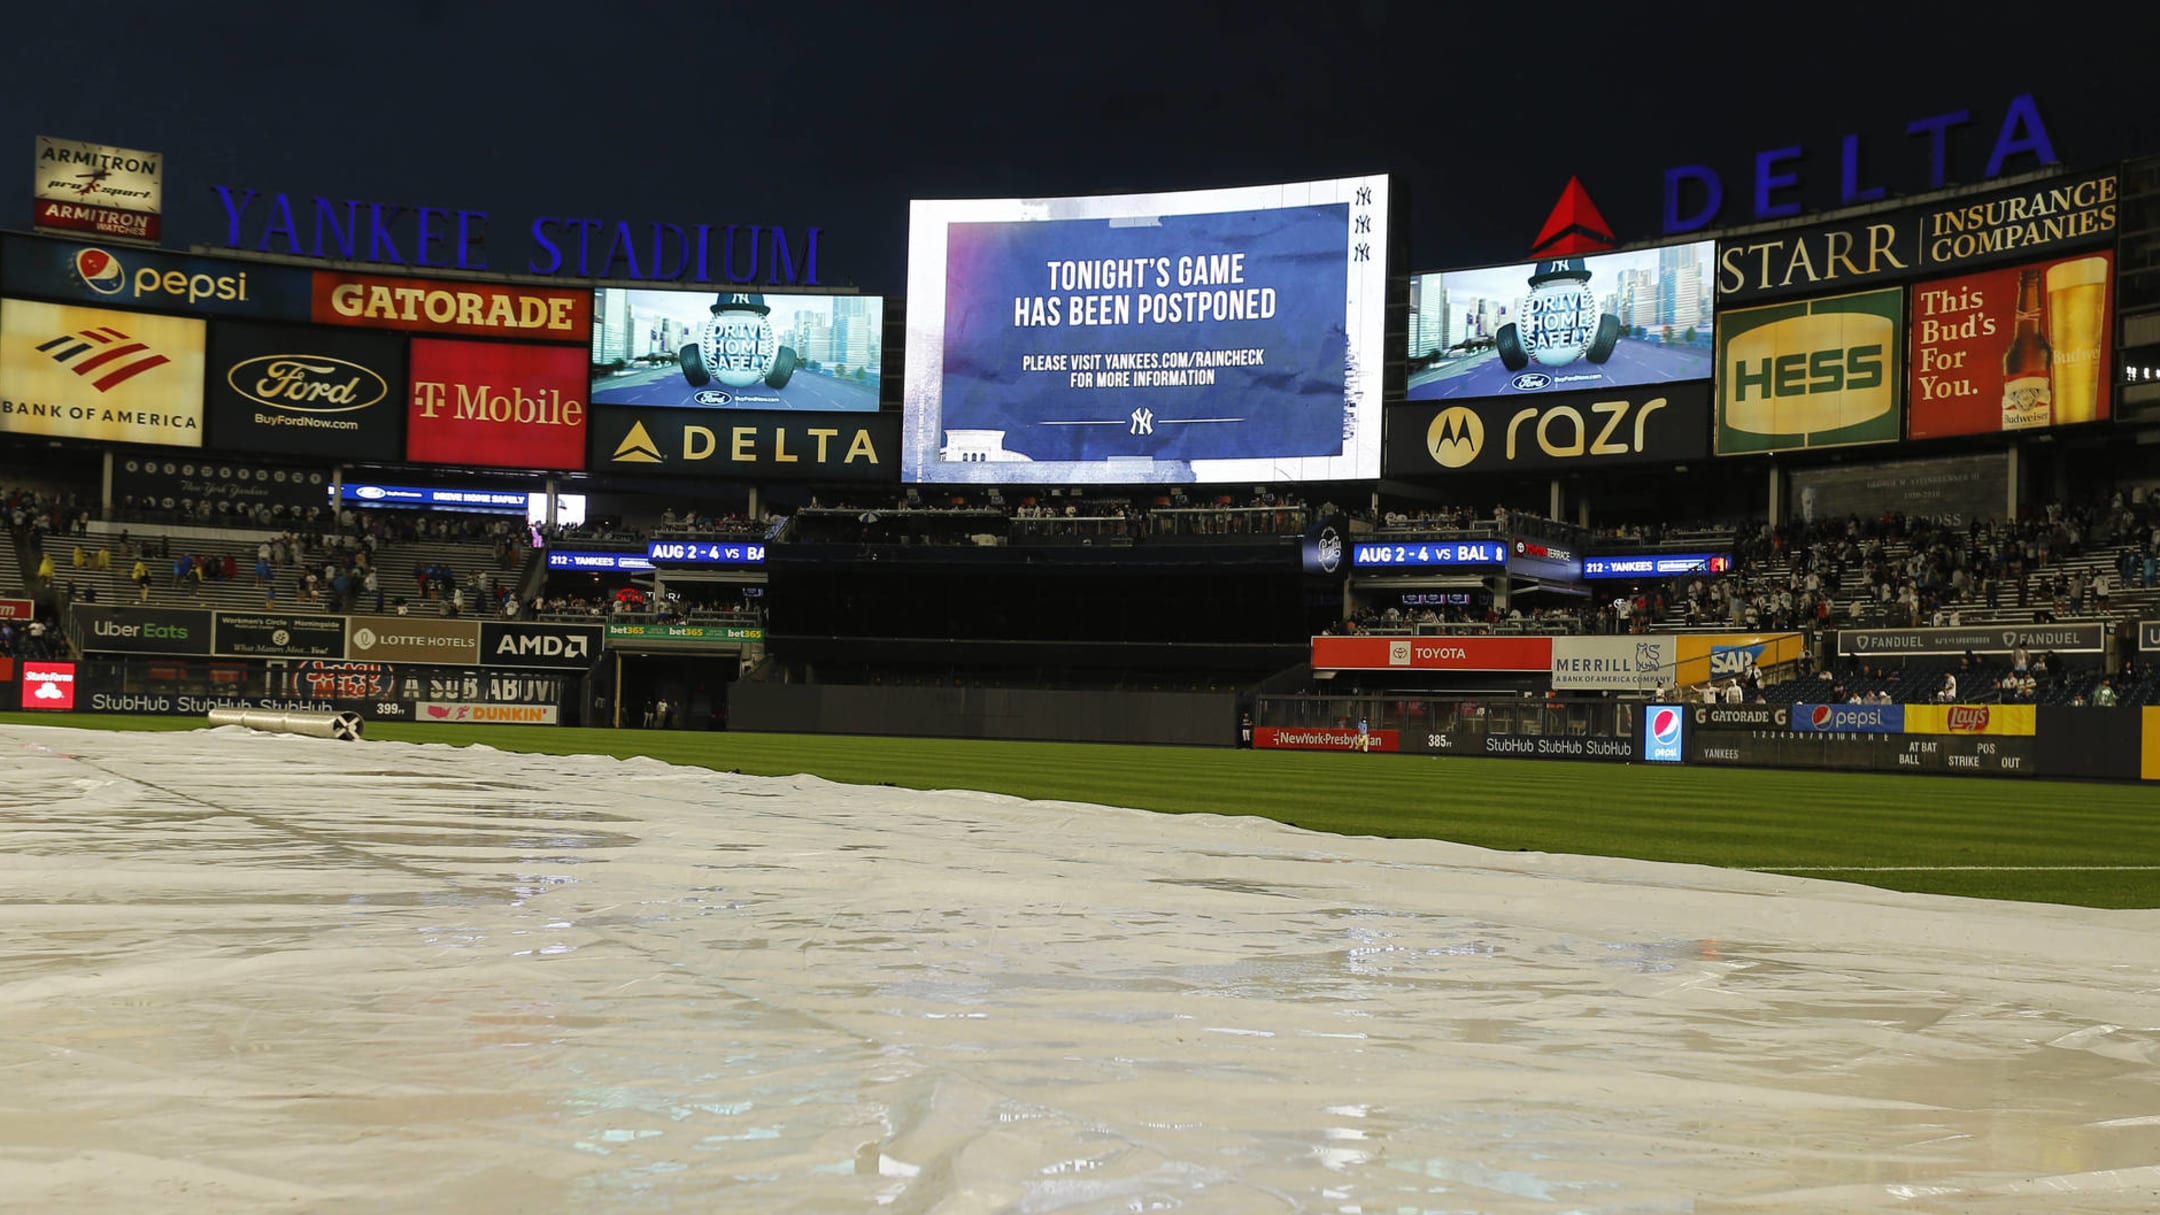 Yankee Stadium bars and stores on 'brink of extinction' without